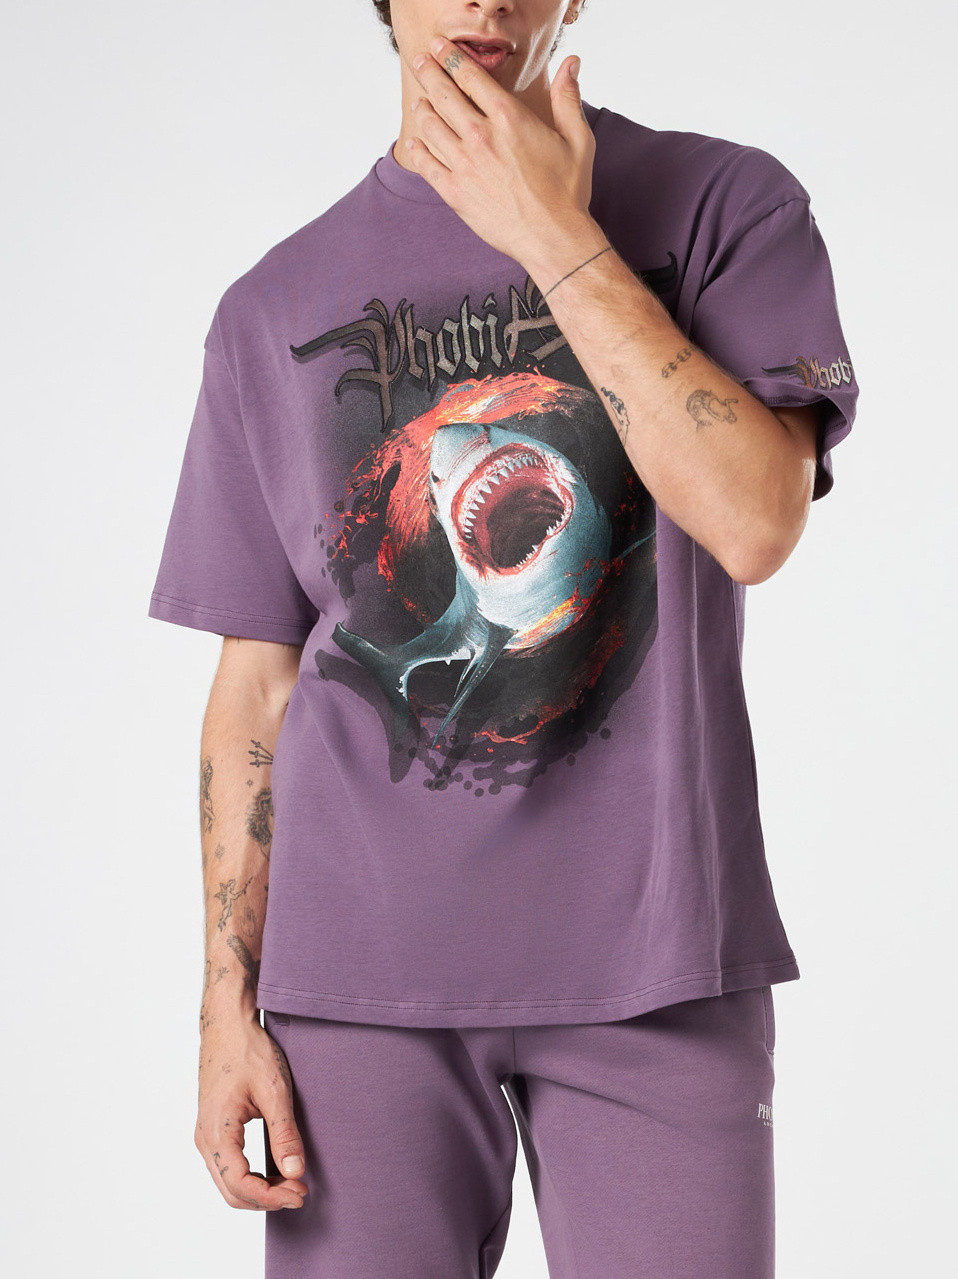 Phobia - Cotton T-shirt with shark print, Purple, large image number 3